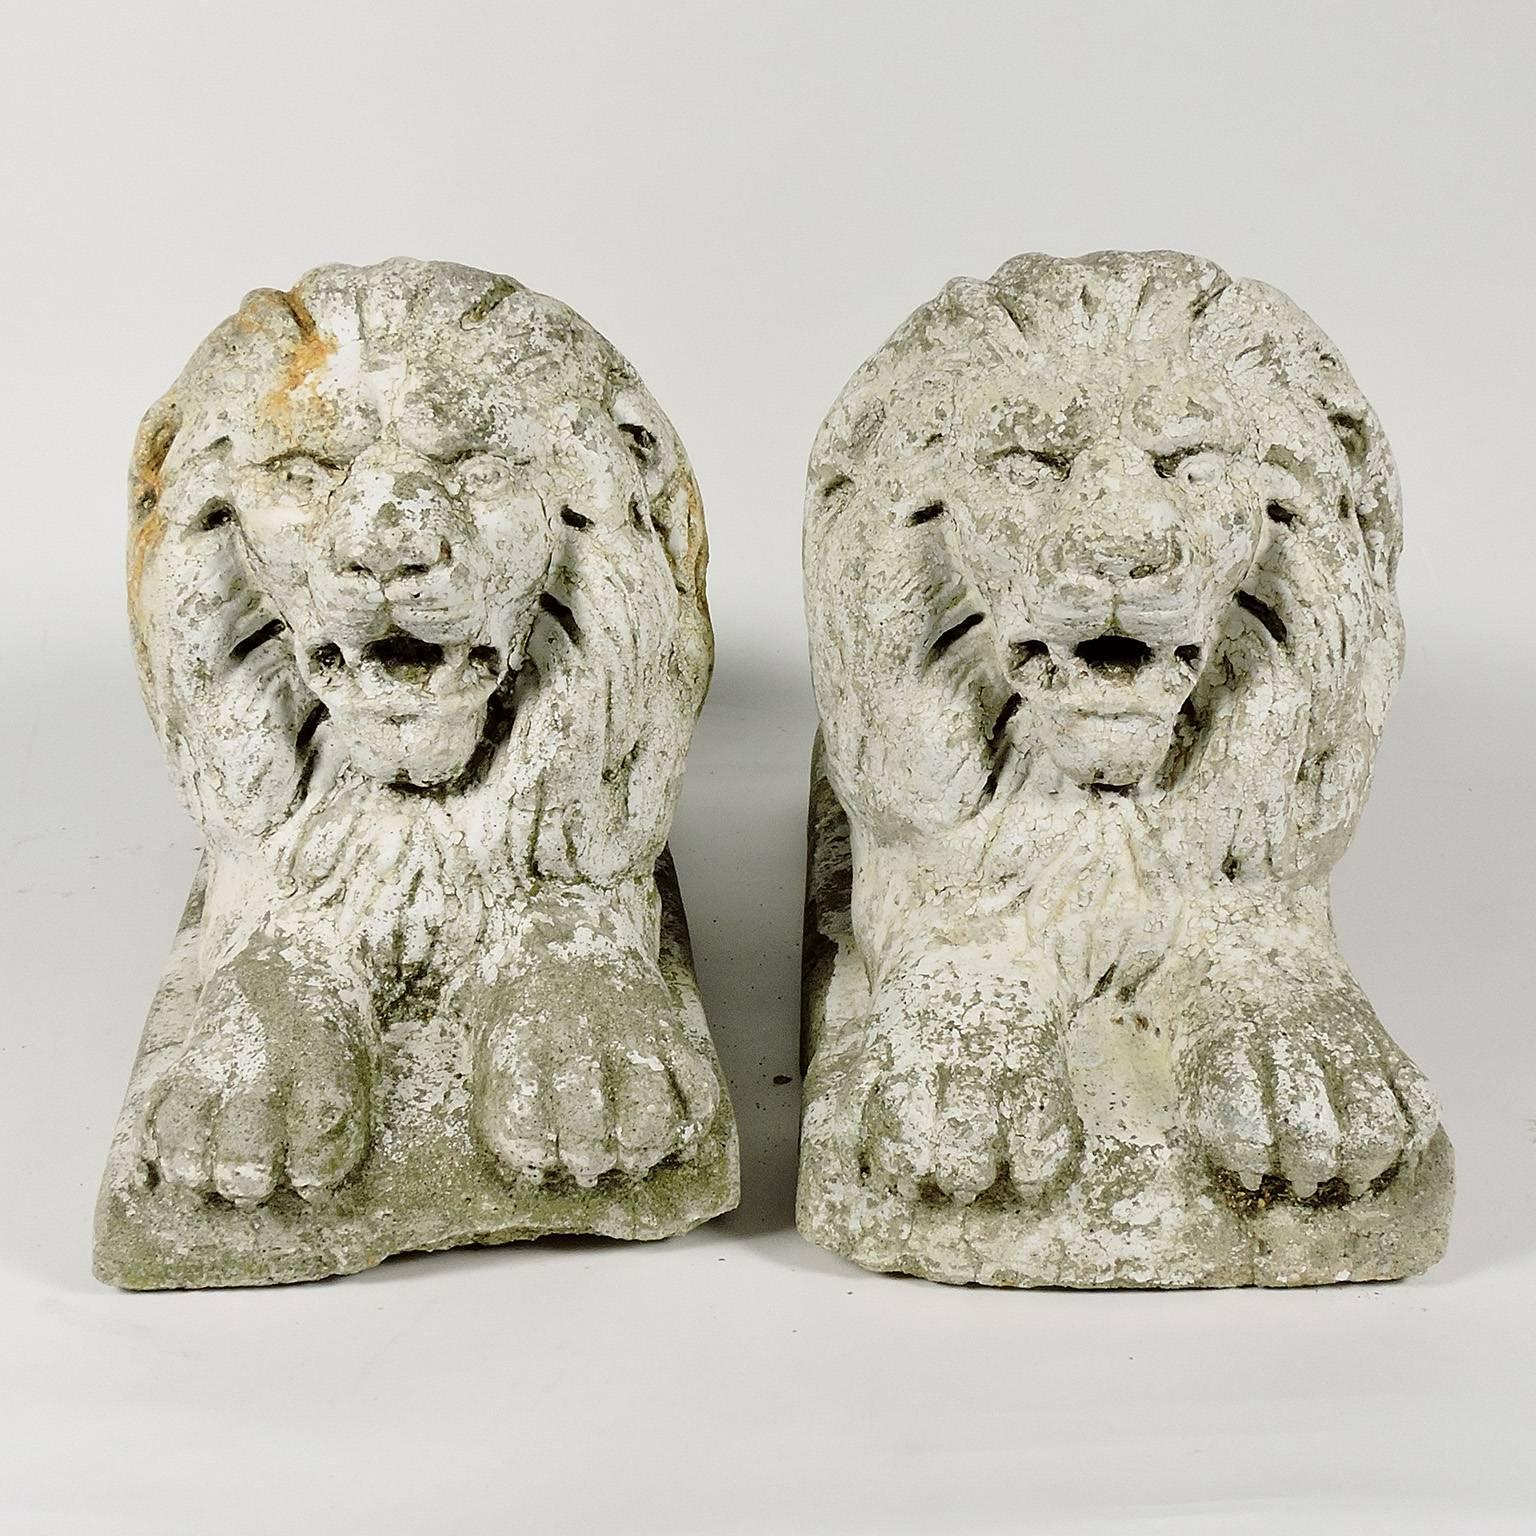 Pair of white painted cast stone recumbent lions, circa 1920.
Measure: Height 10 1/4 in, length 16 1/4 in, width 7 in.